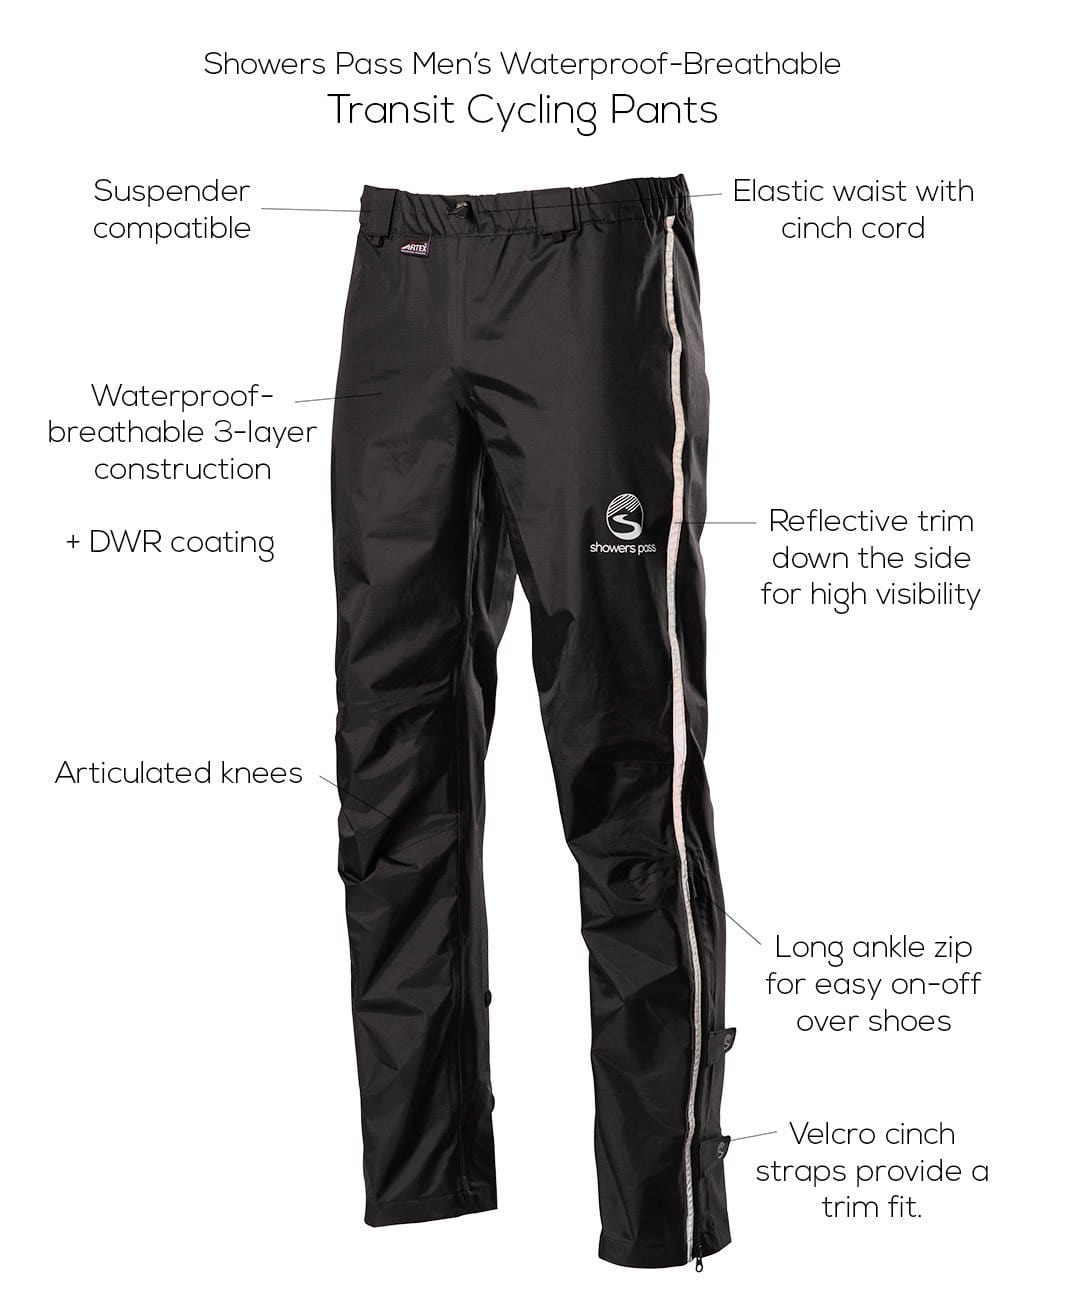 12 Pieces - Men's Tracksuit with Reflective Trim in Black